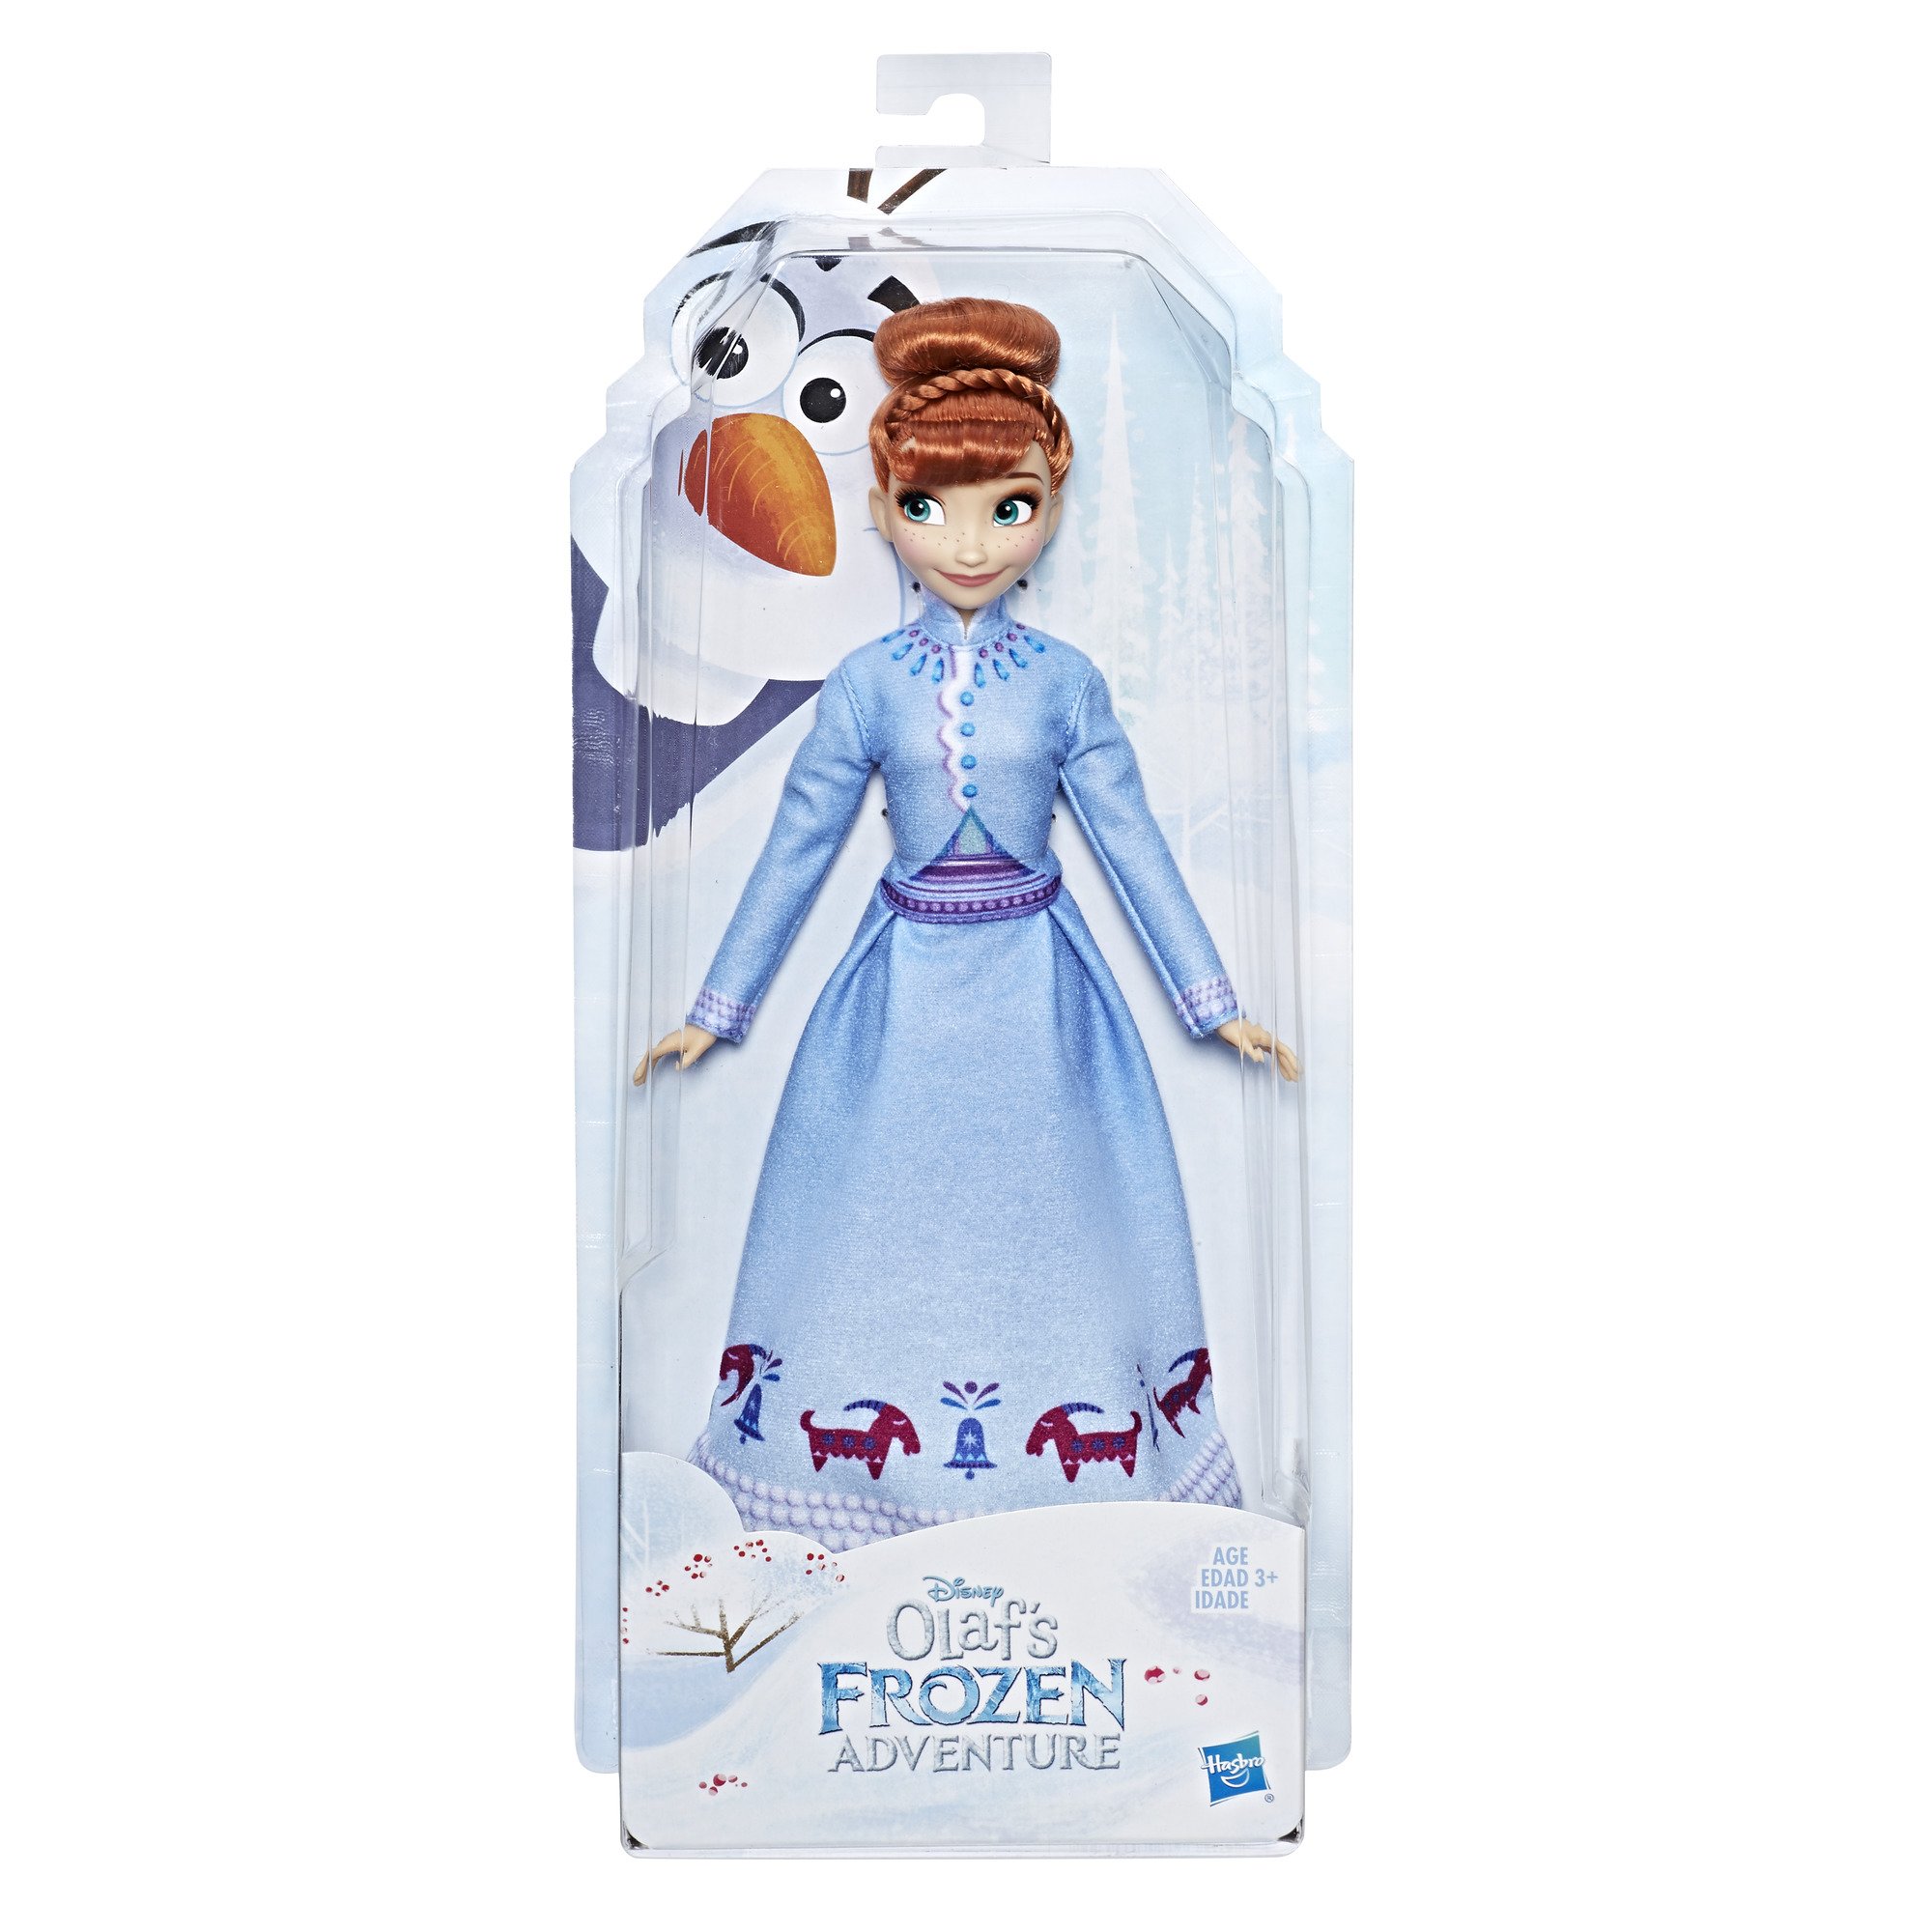 Disney Frozen Olaf\'S Frozen Adventure Anna Doll, Includes Matching Shoes - image 2 of 2